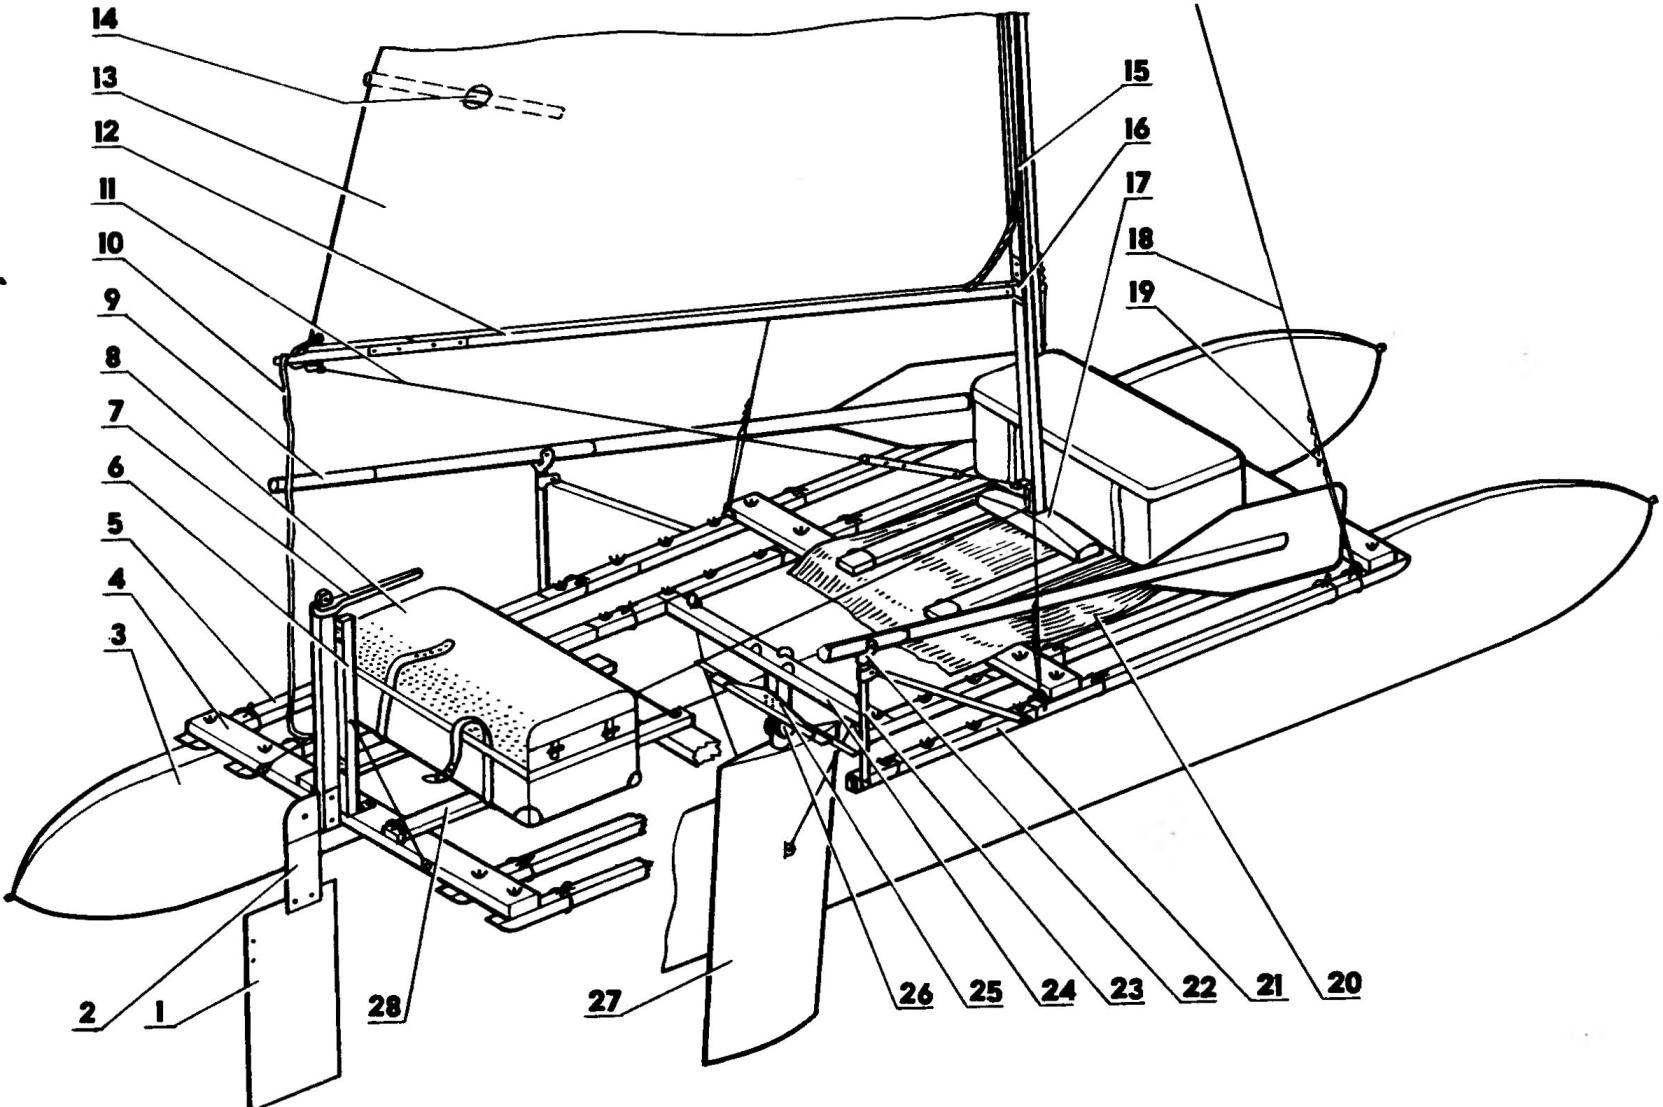 Fig. 2. The device of the catamaran